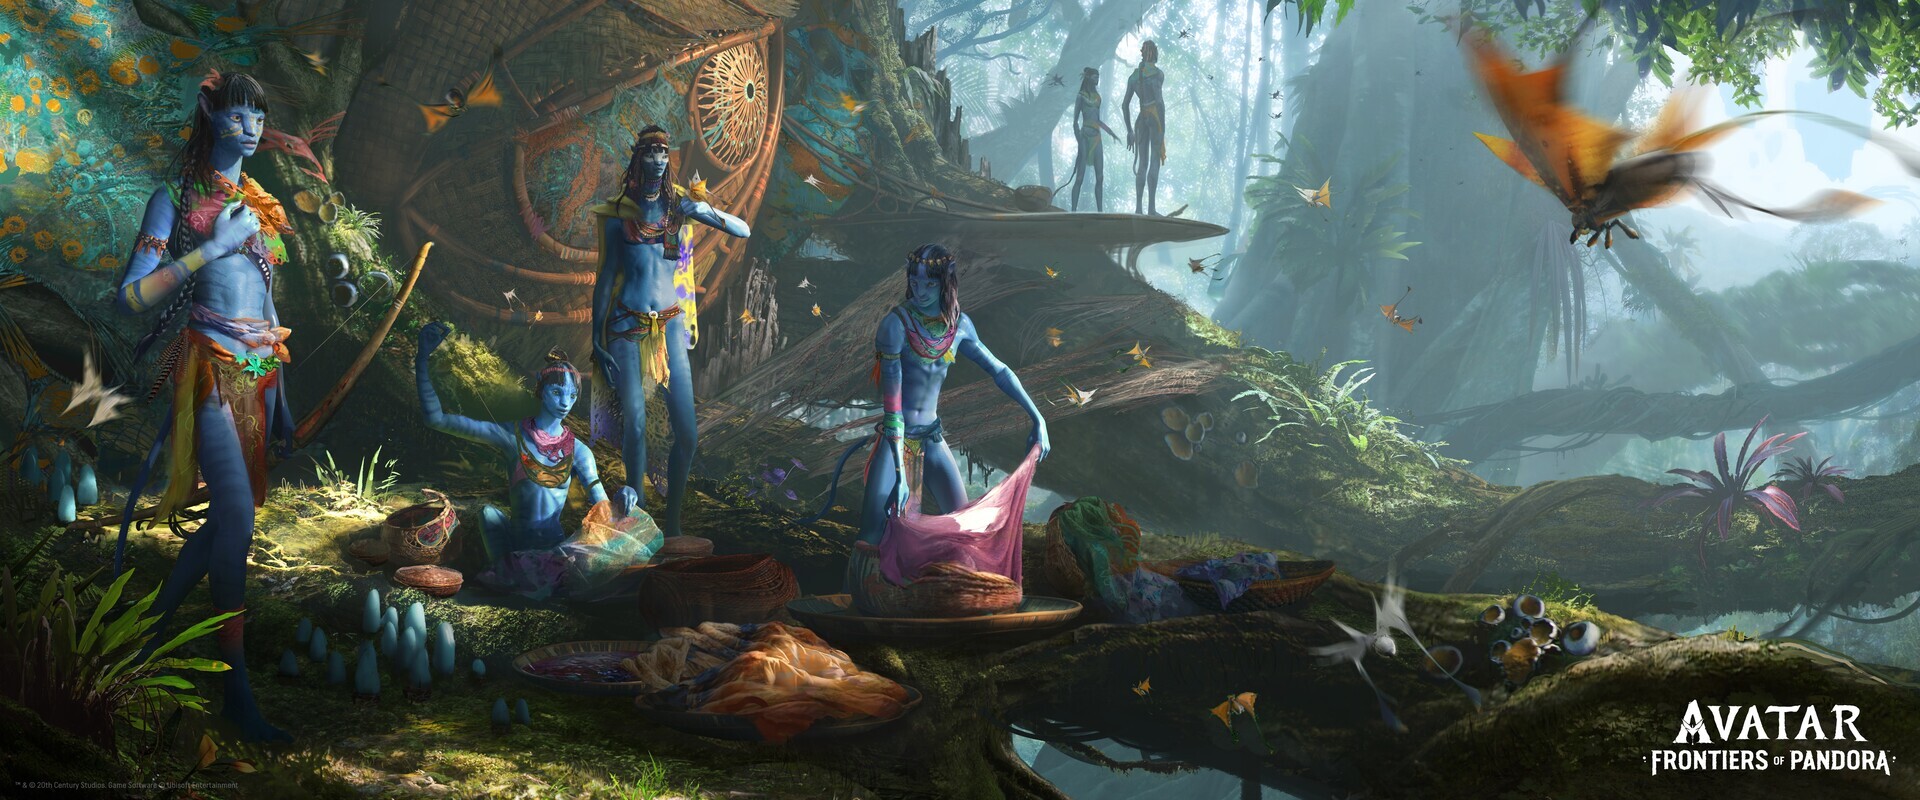 Avatar: Frontiers of Pandora - Official World Premiere Trailer